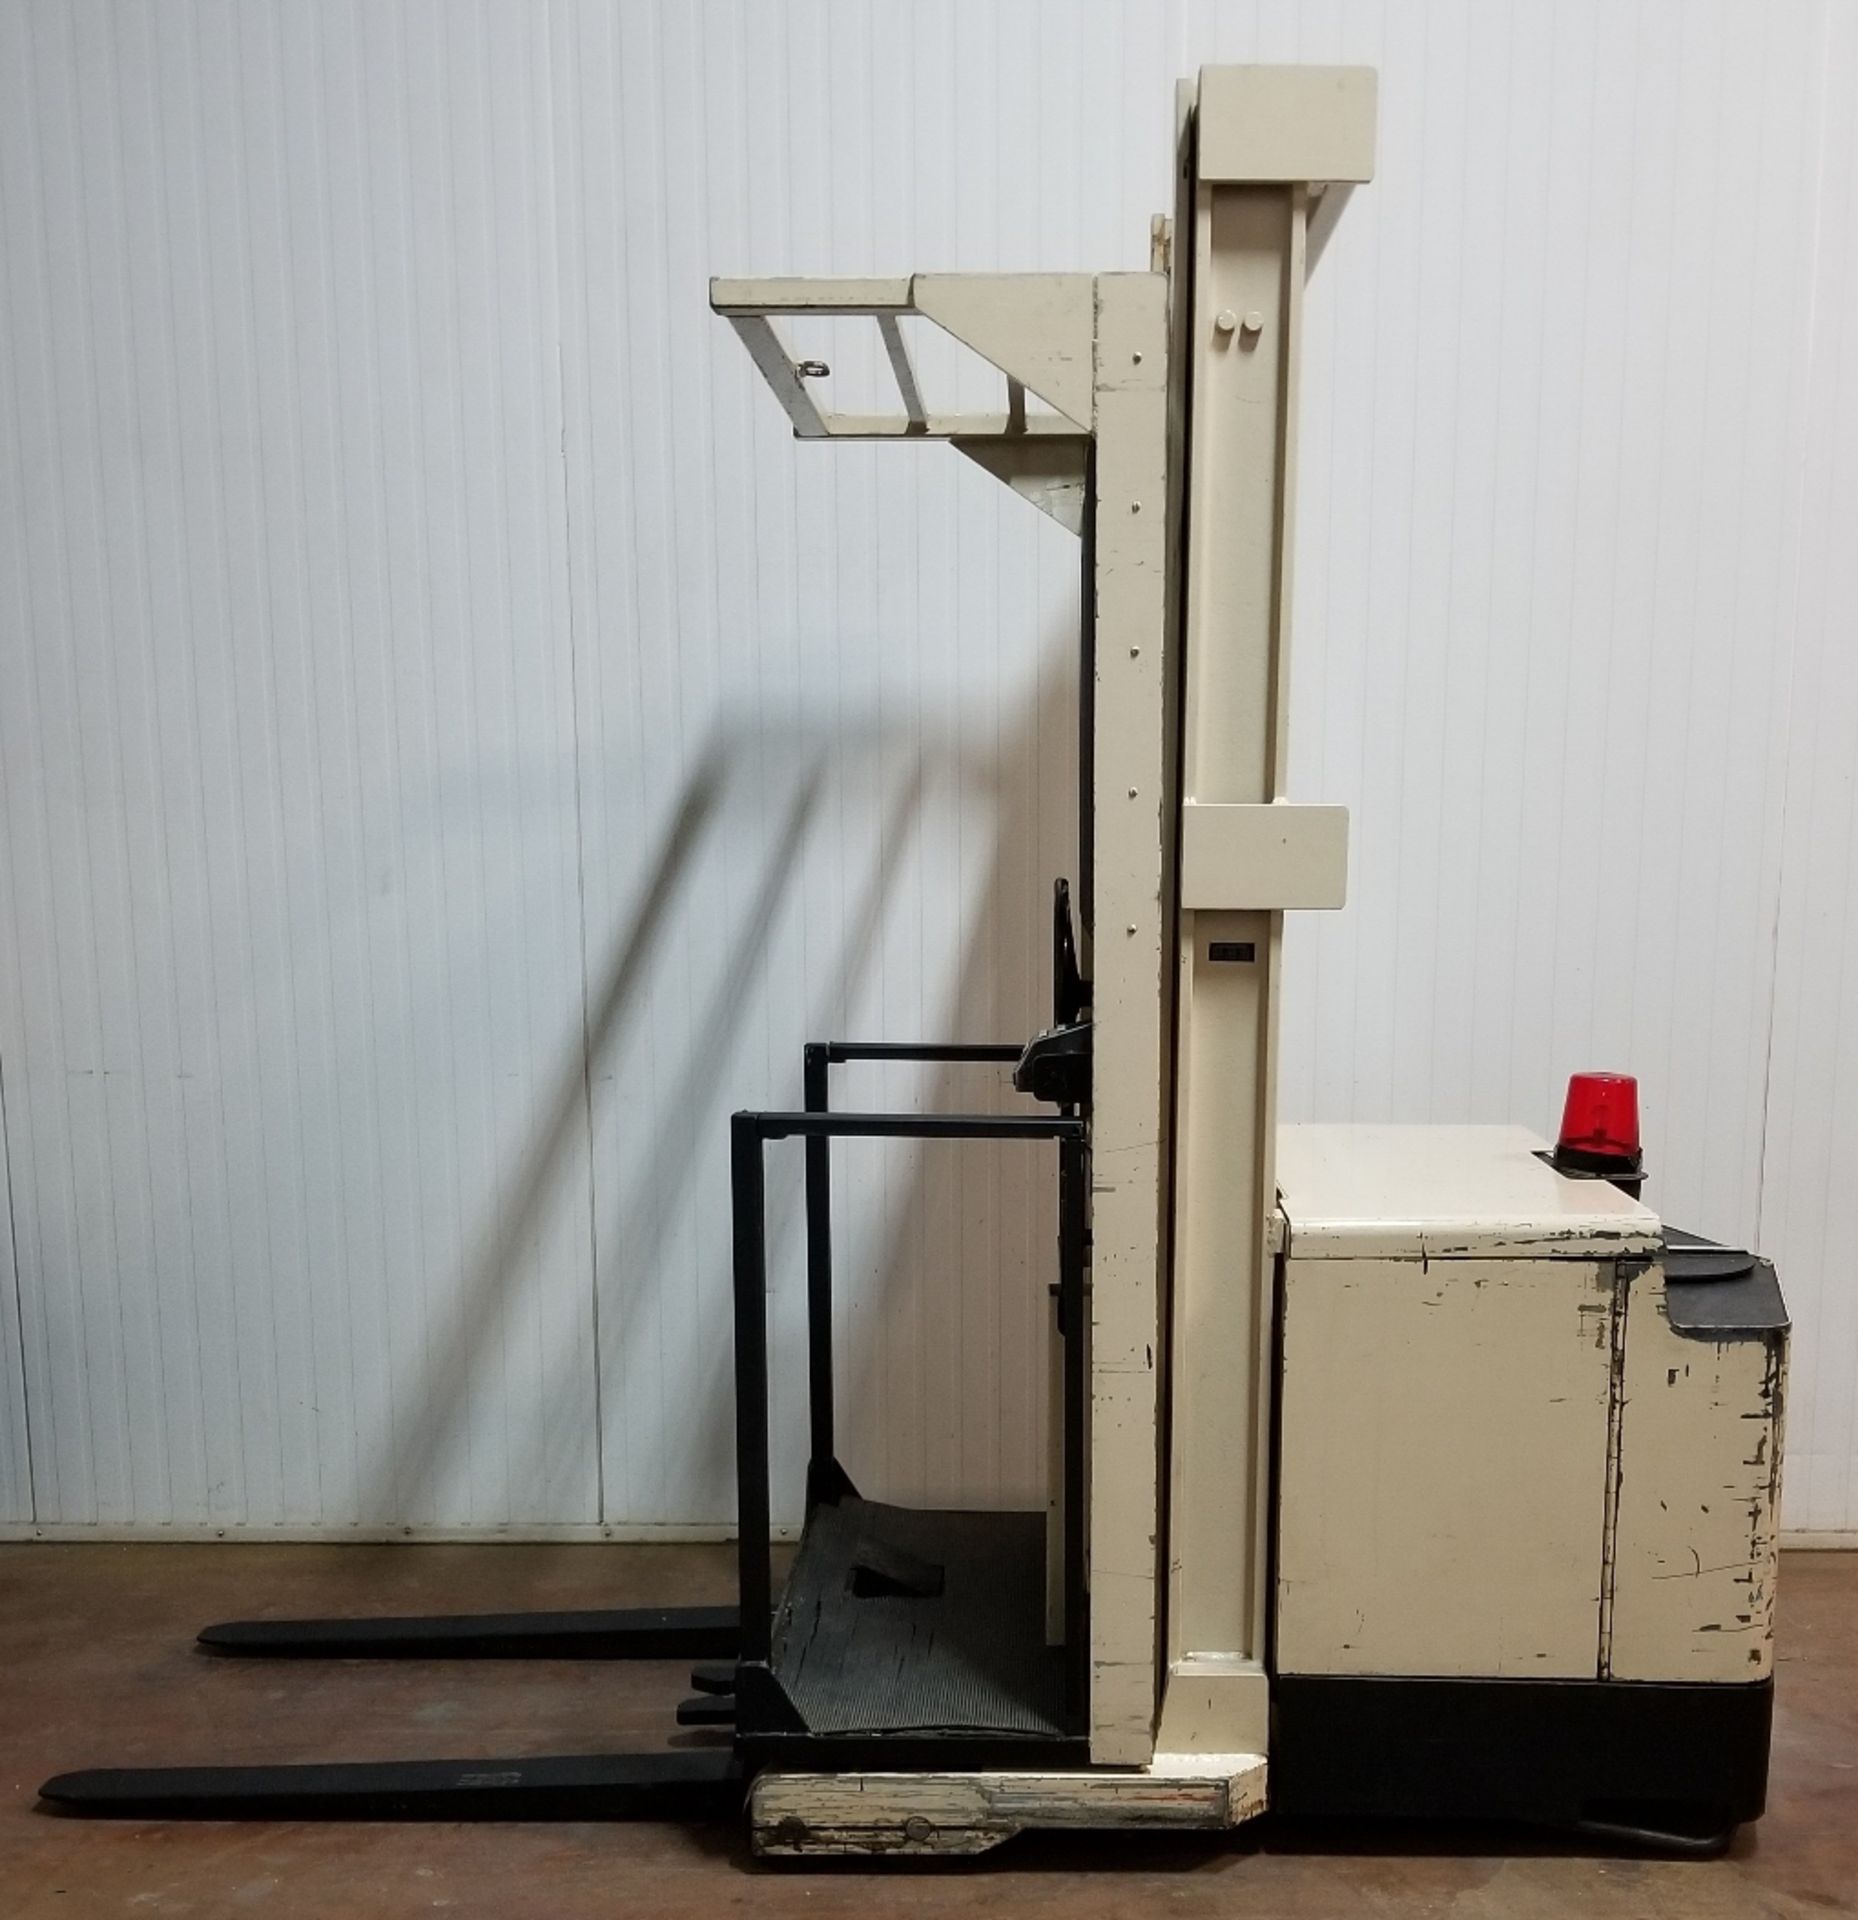 CROWN 30SP36TL 3,000 LB. CAPACITY 24V ELECTRIC ORDER PICKER FORKLIFT WITH 150" MAX. LIFT HEIGHT, S/